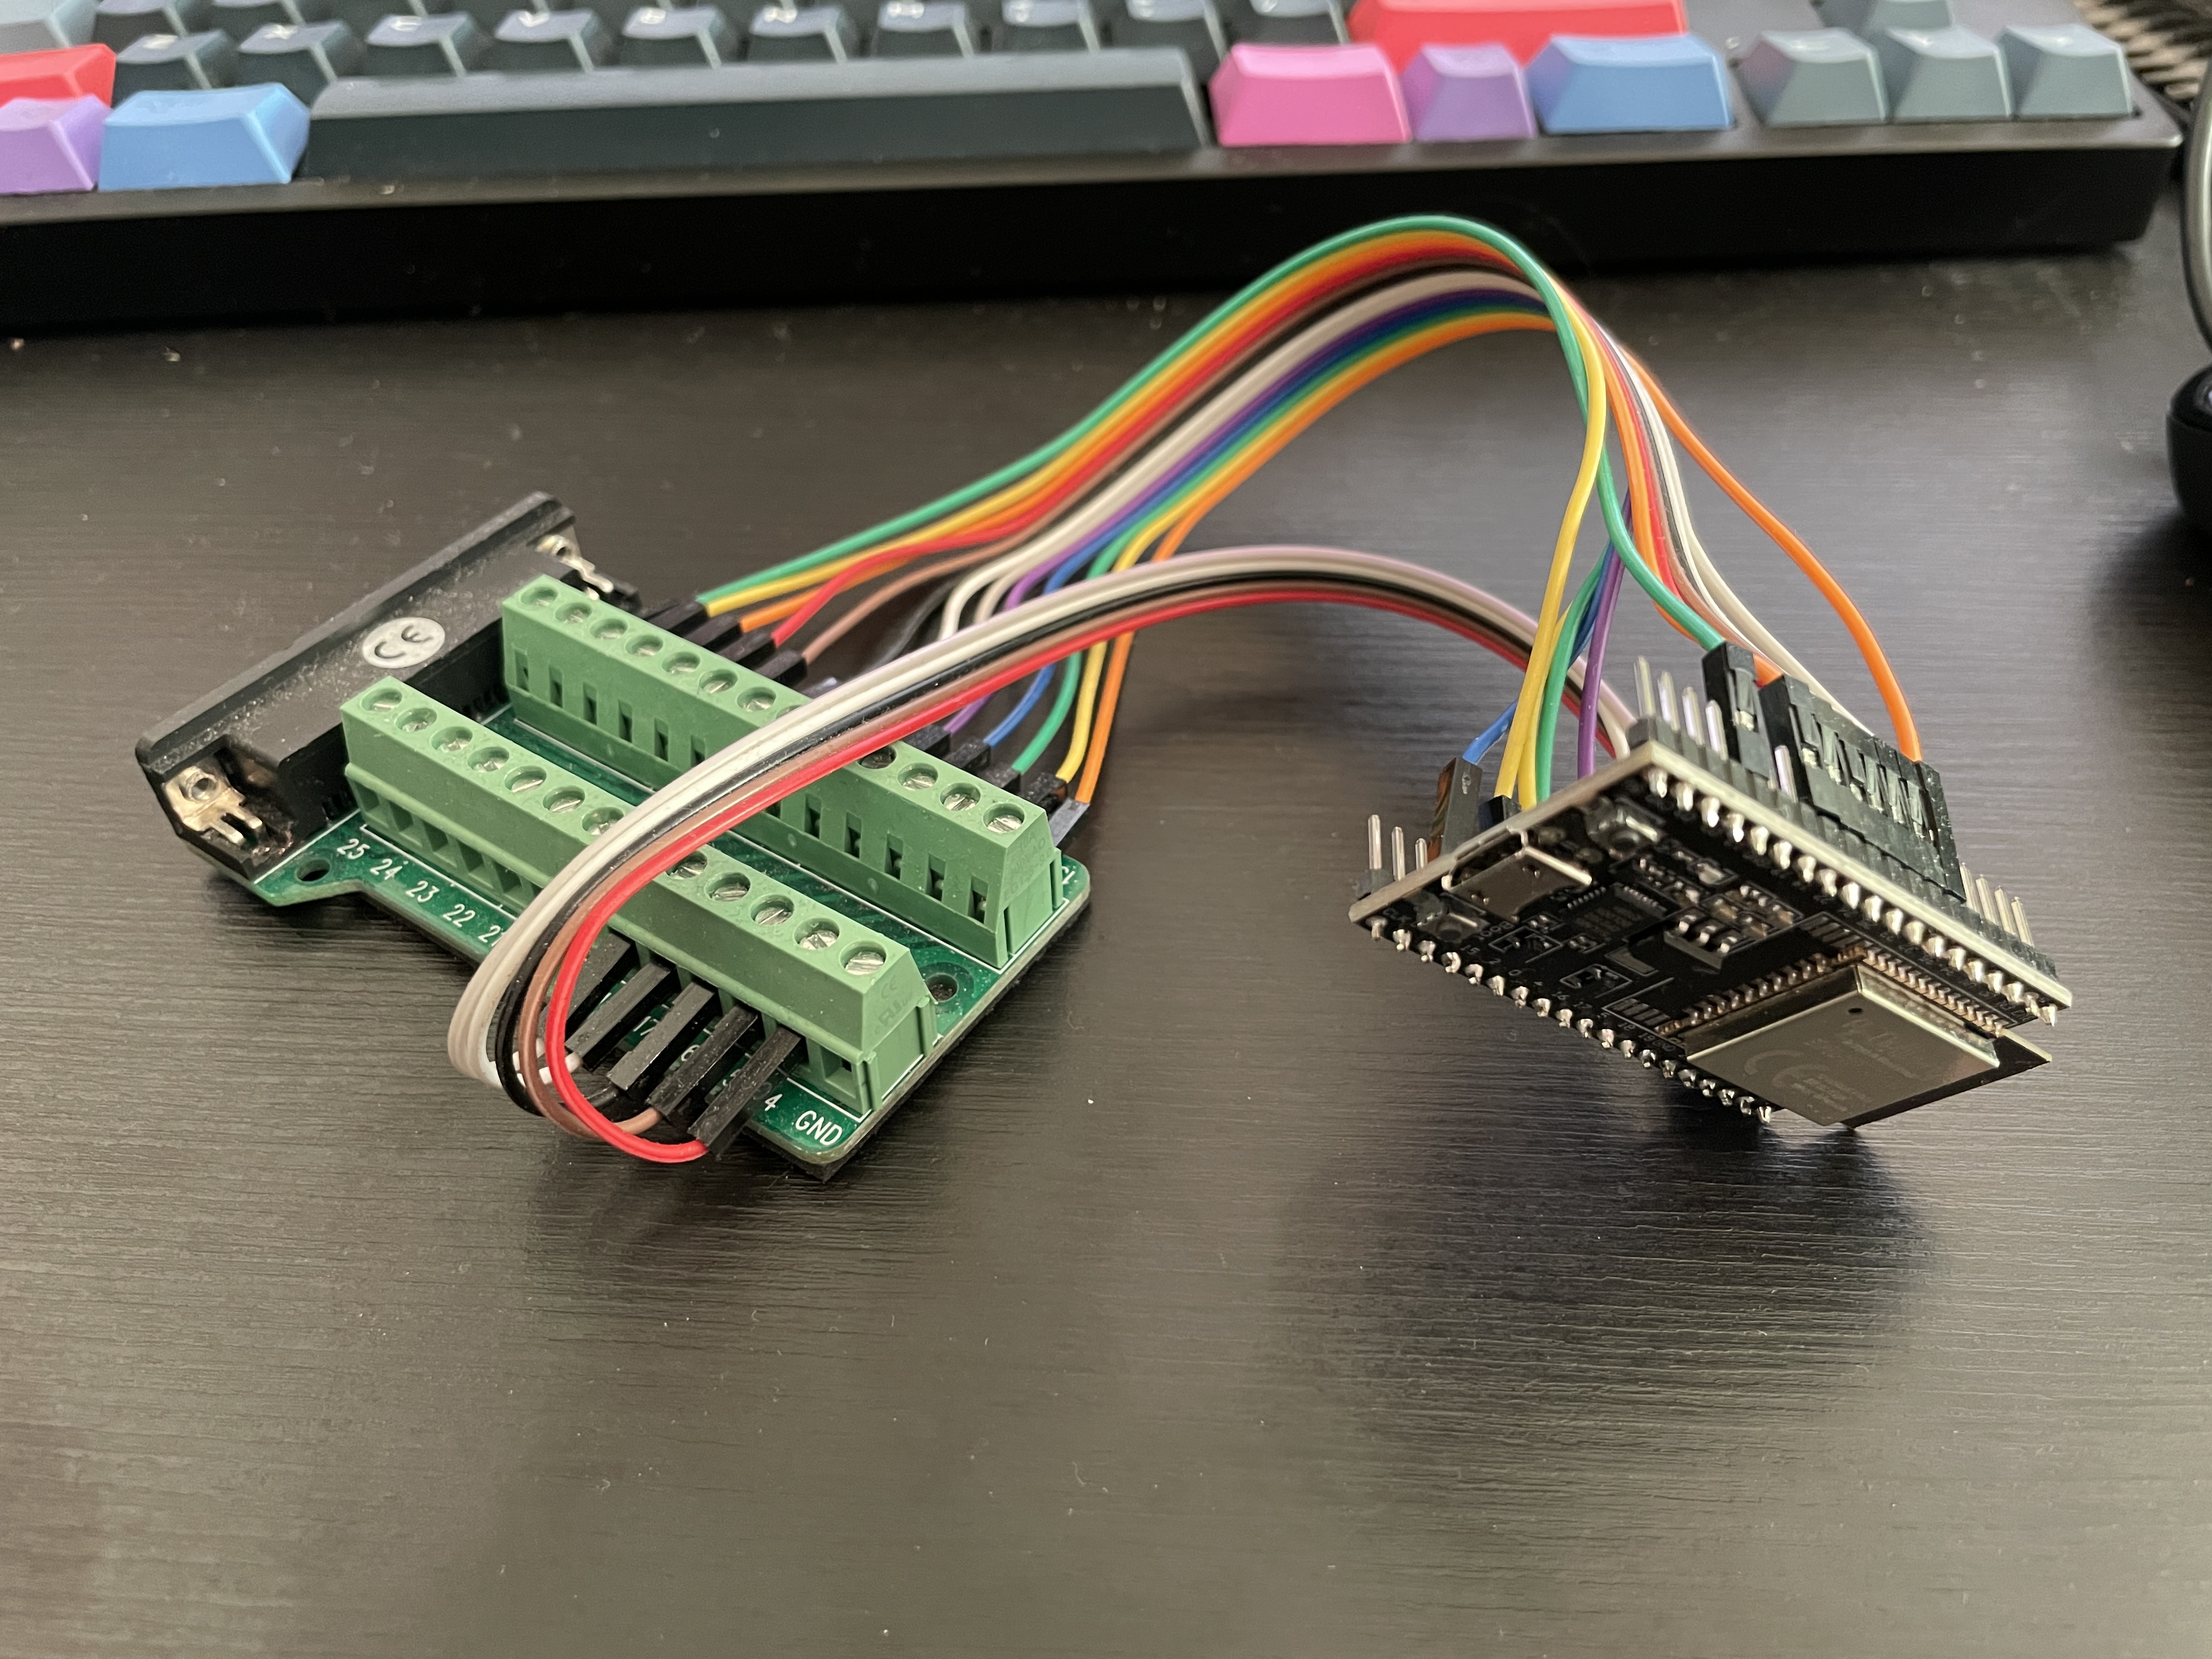 ESP32 wired up to a paralell port breakout